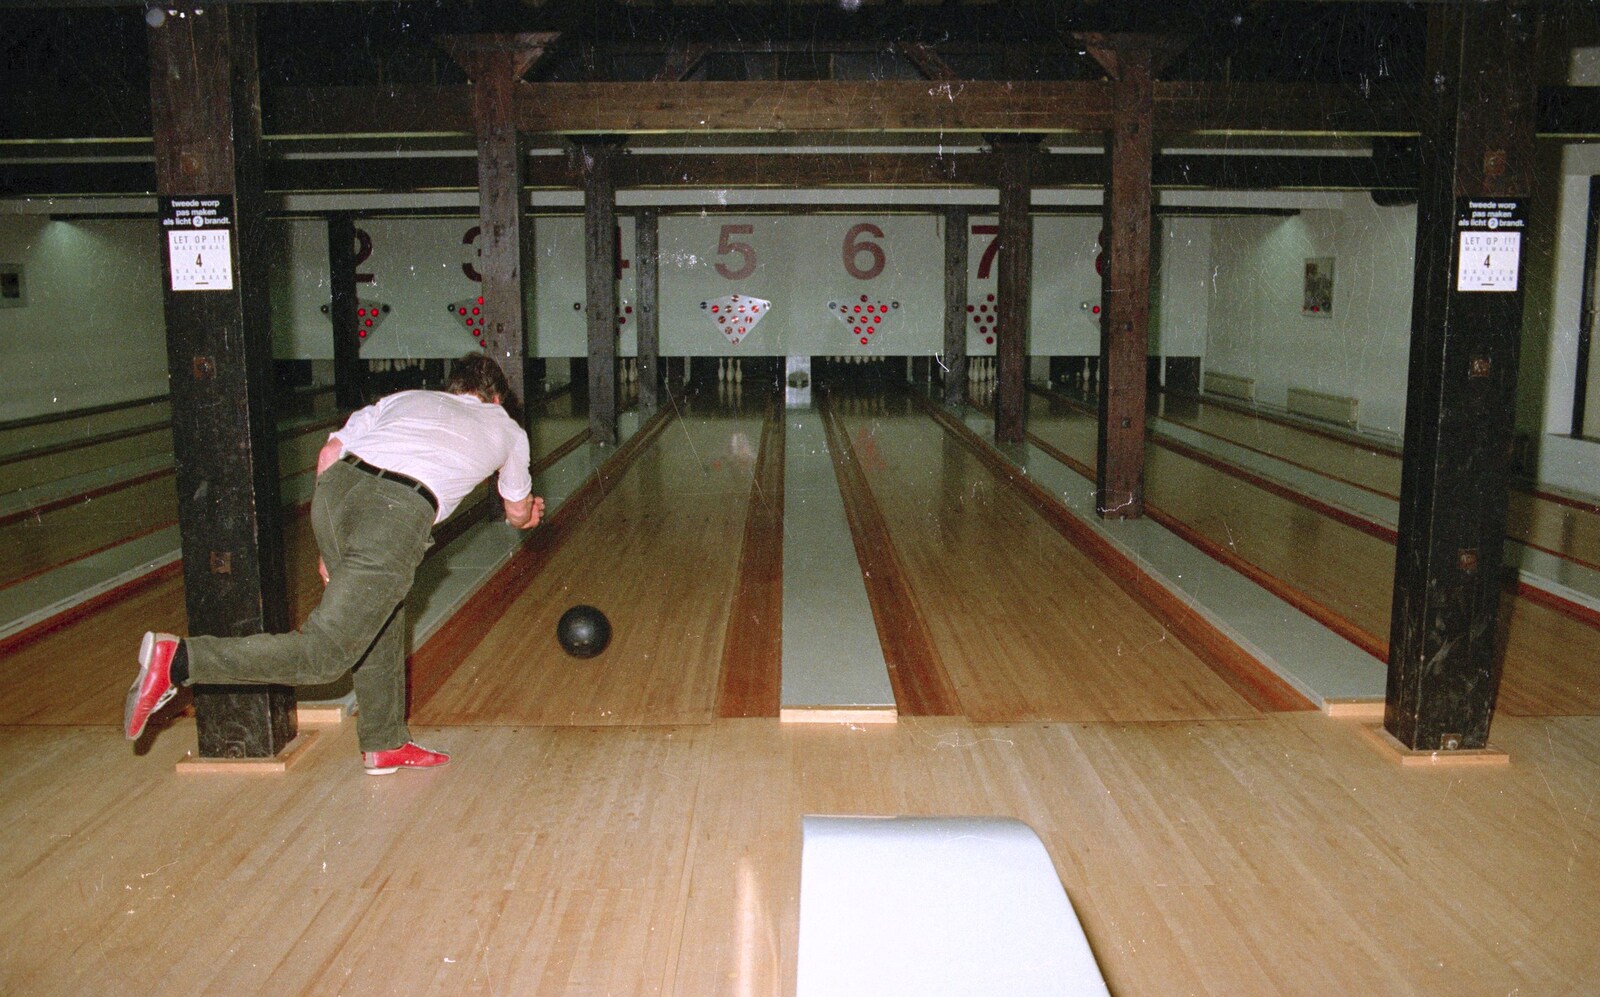 A Trip to Center Parcs, Eemhof, Netherlands - 24th March 1992: Geoff lobs a bowling ball down the lane